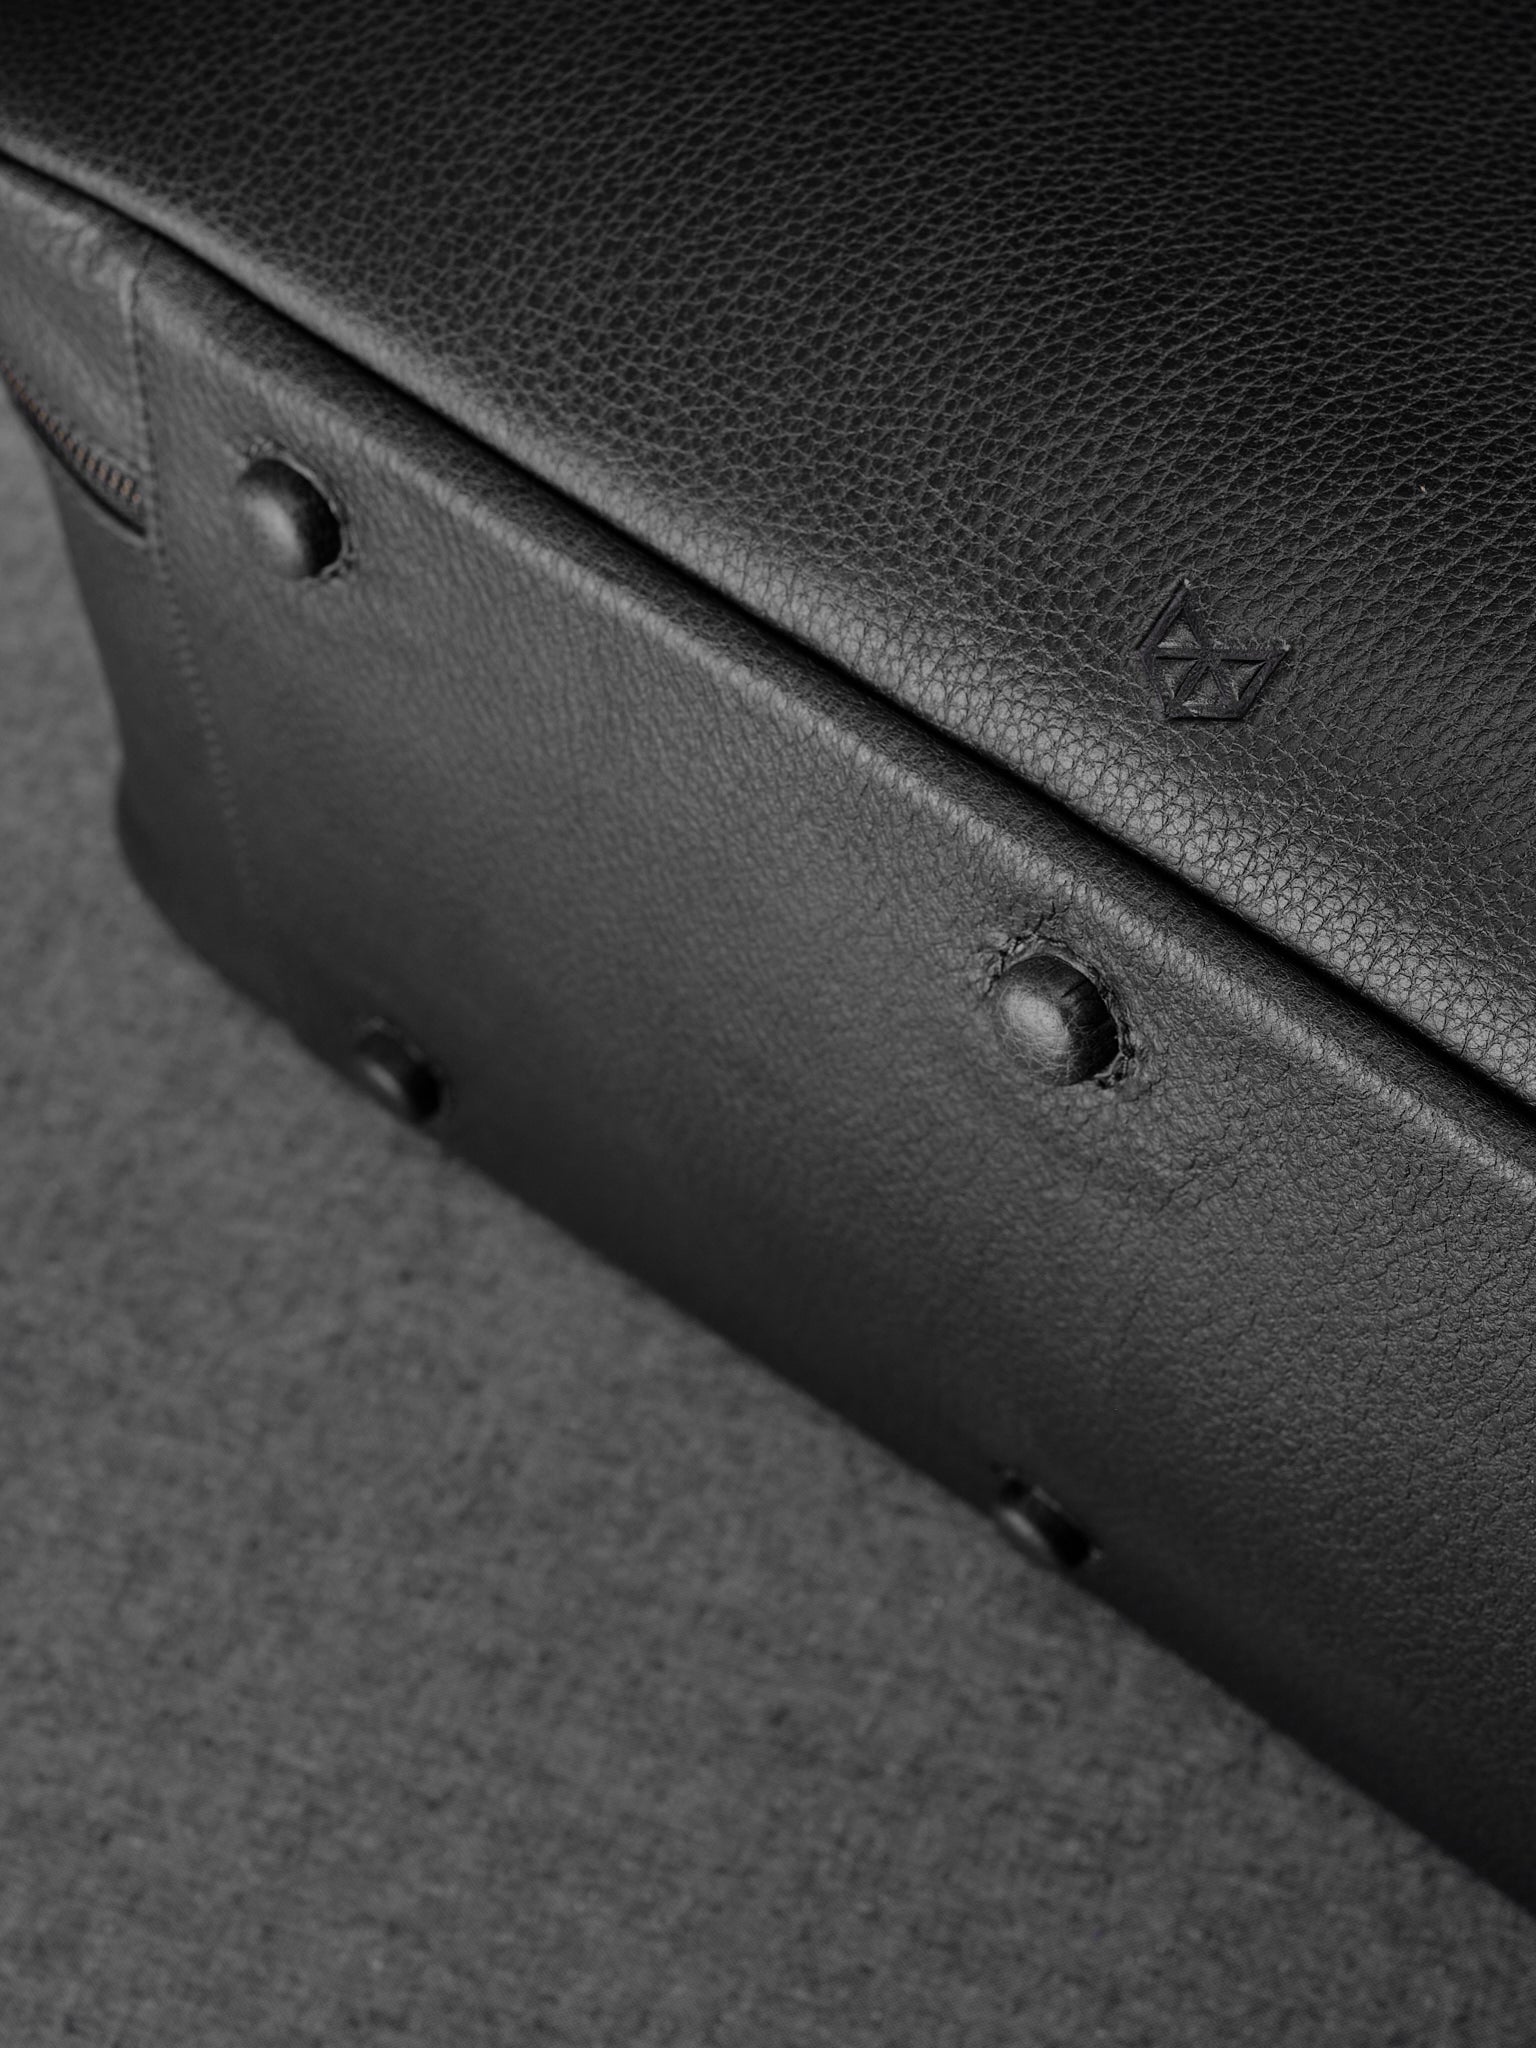 Leather feets. Weekender Duffle Bag Black by Capra Leather